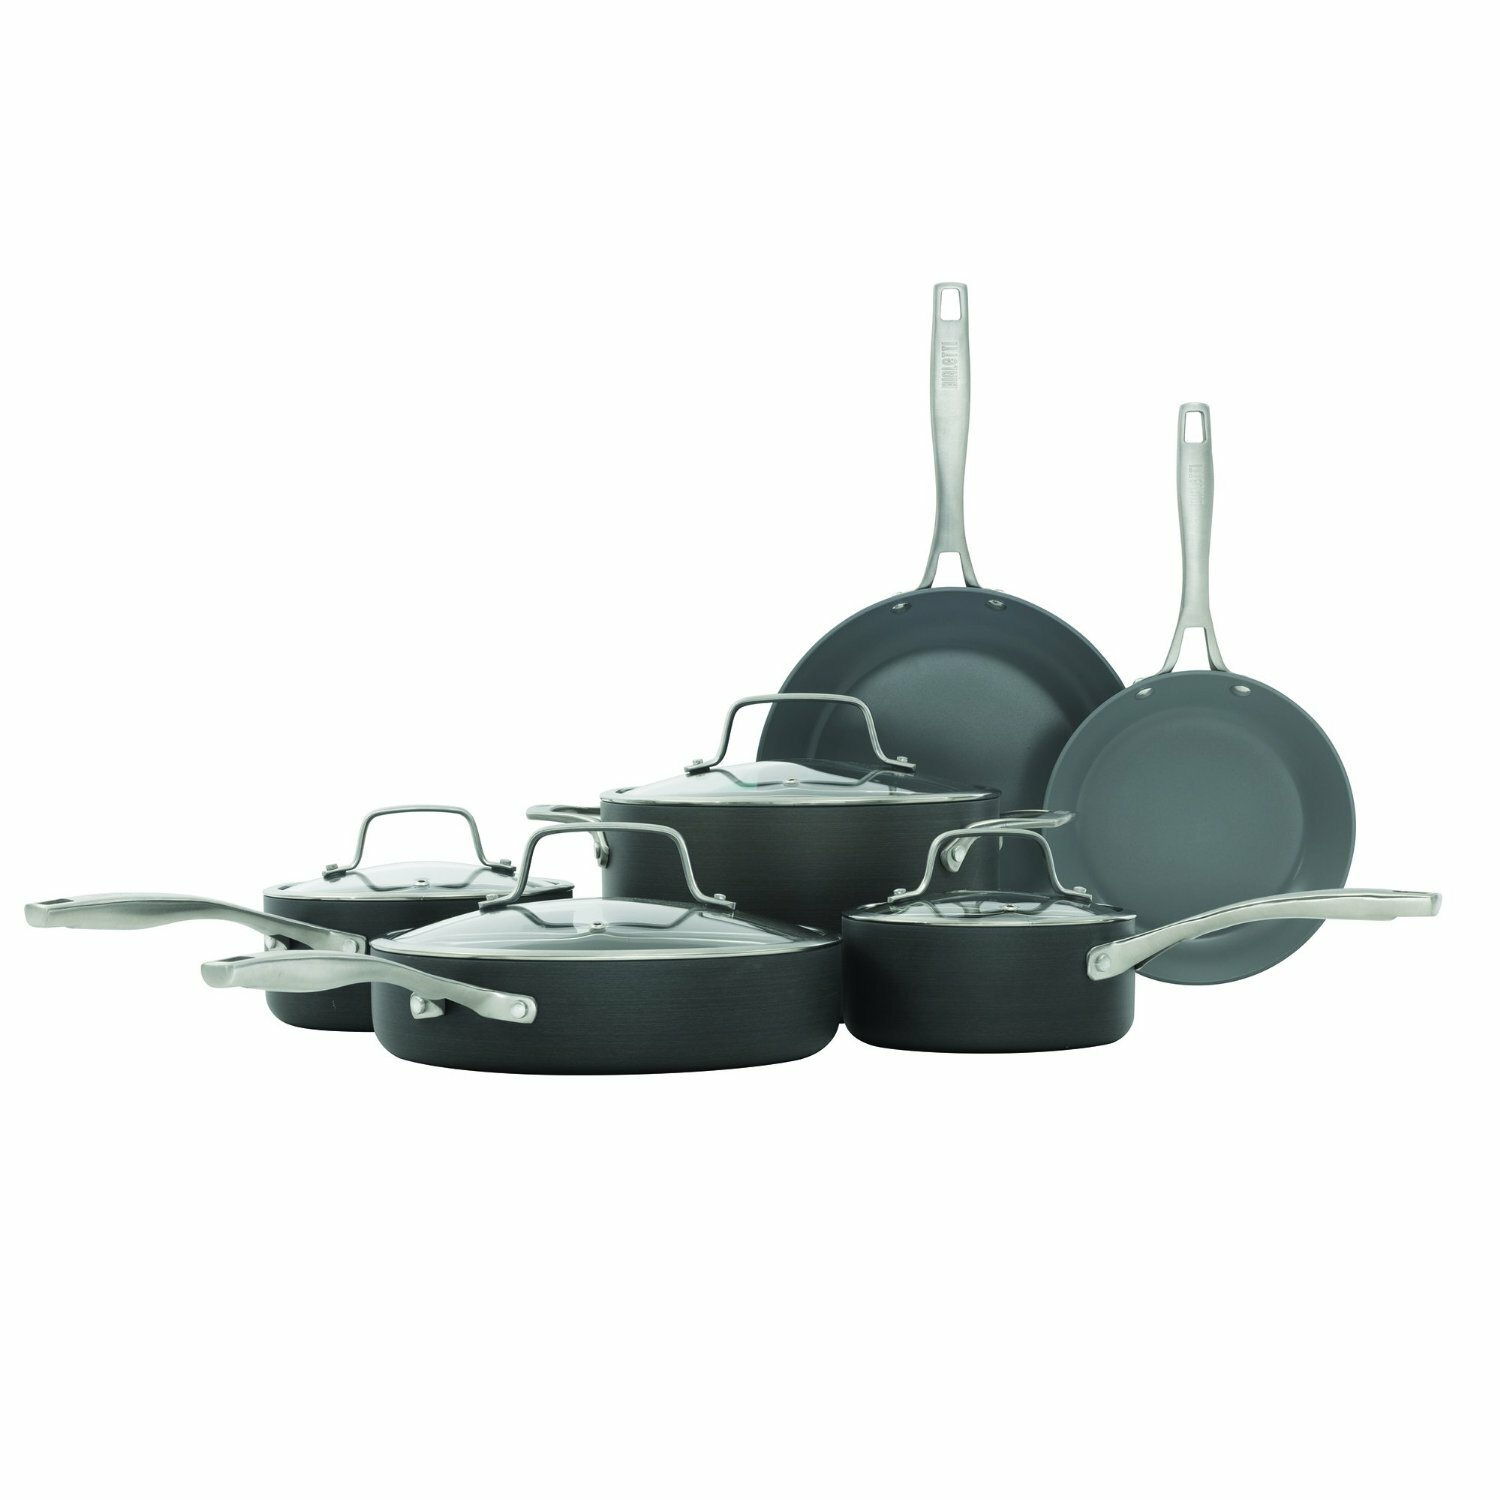 Set Of 2 Bialetti Italian Professional Quality Stainless Steel Cookware